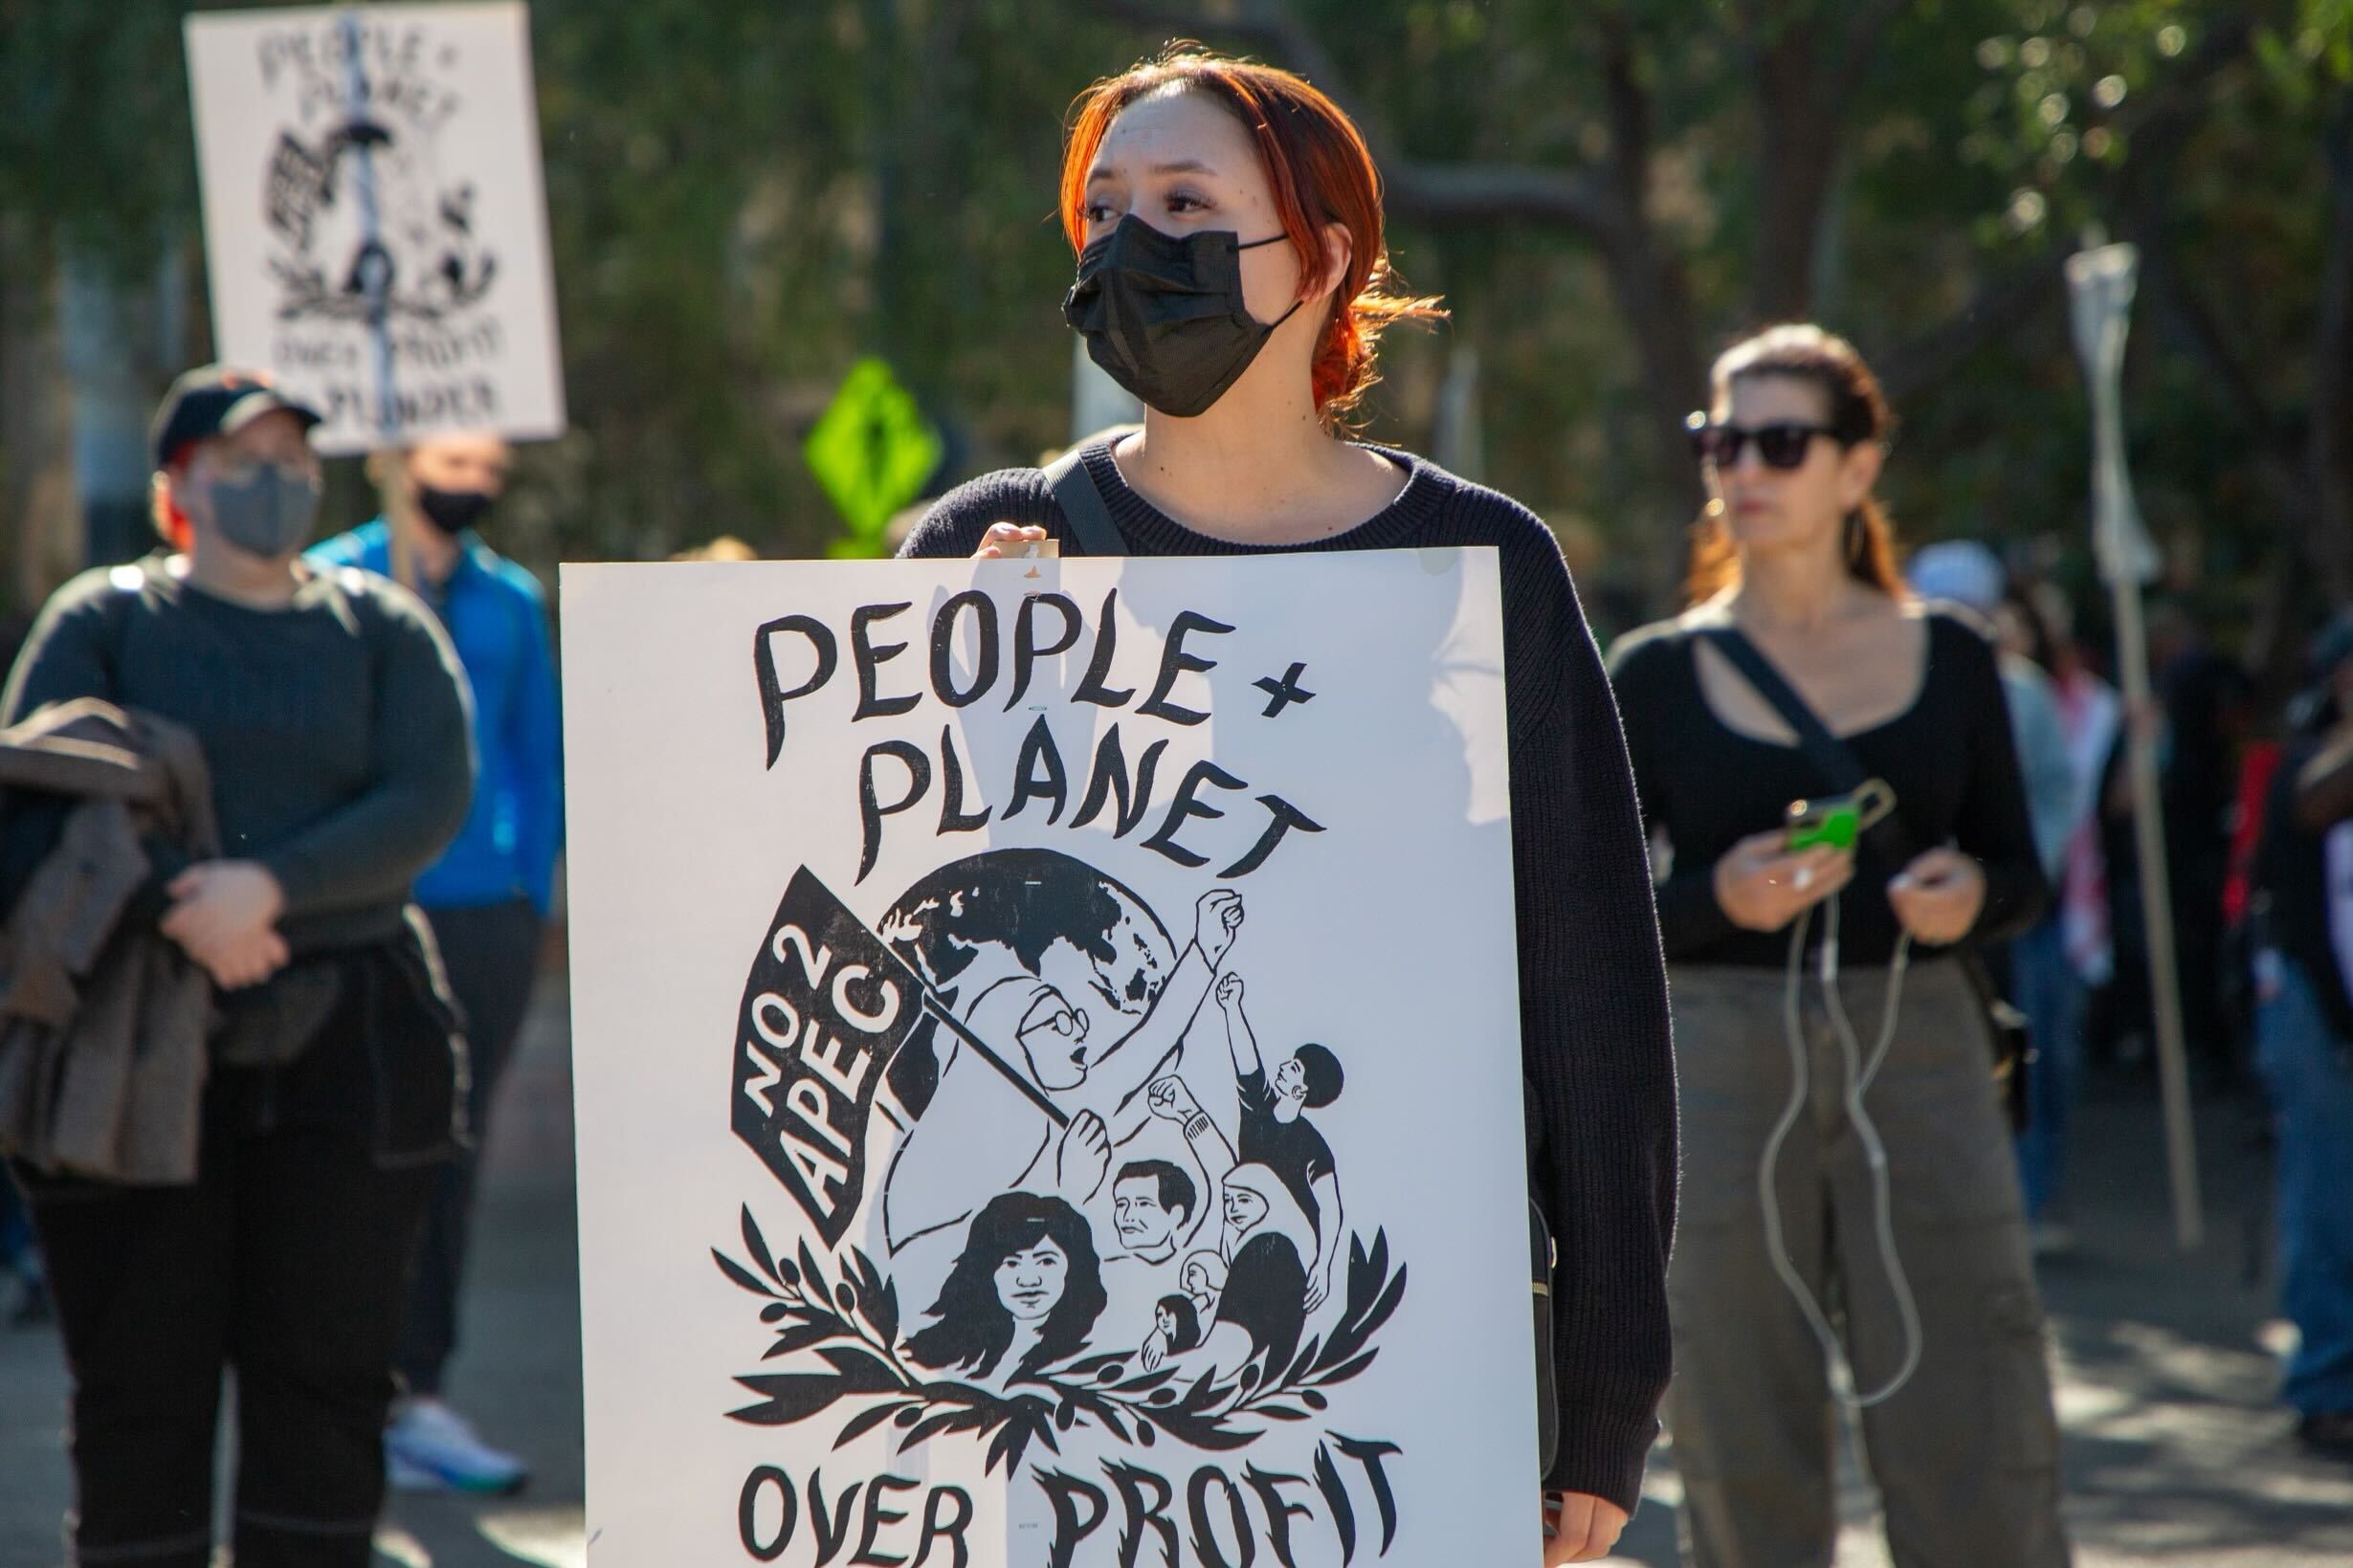 A woman holds a sign that reads “People + Planet over Profit + Plunder” during a “No to APEC” protest in San Francisco.